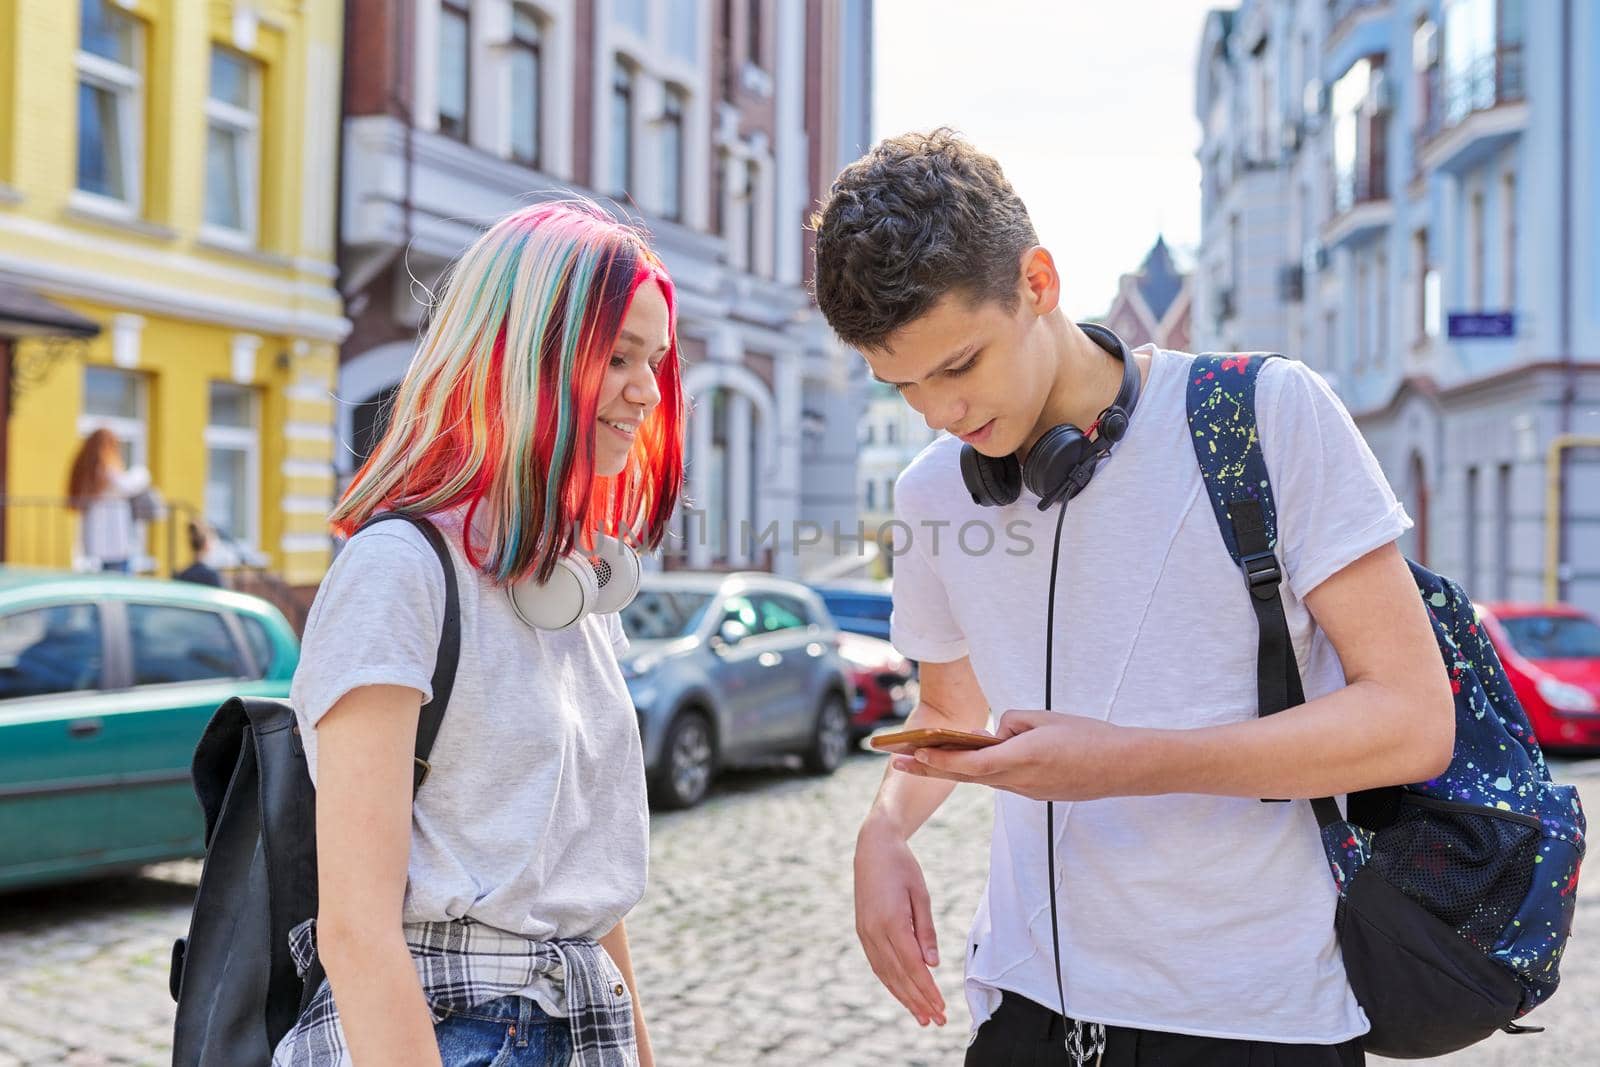 Teenagers students guy and girl with backpacks and headphones look in smartphone screen, talk, city street background. High school and college, communication, youth concept